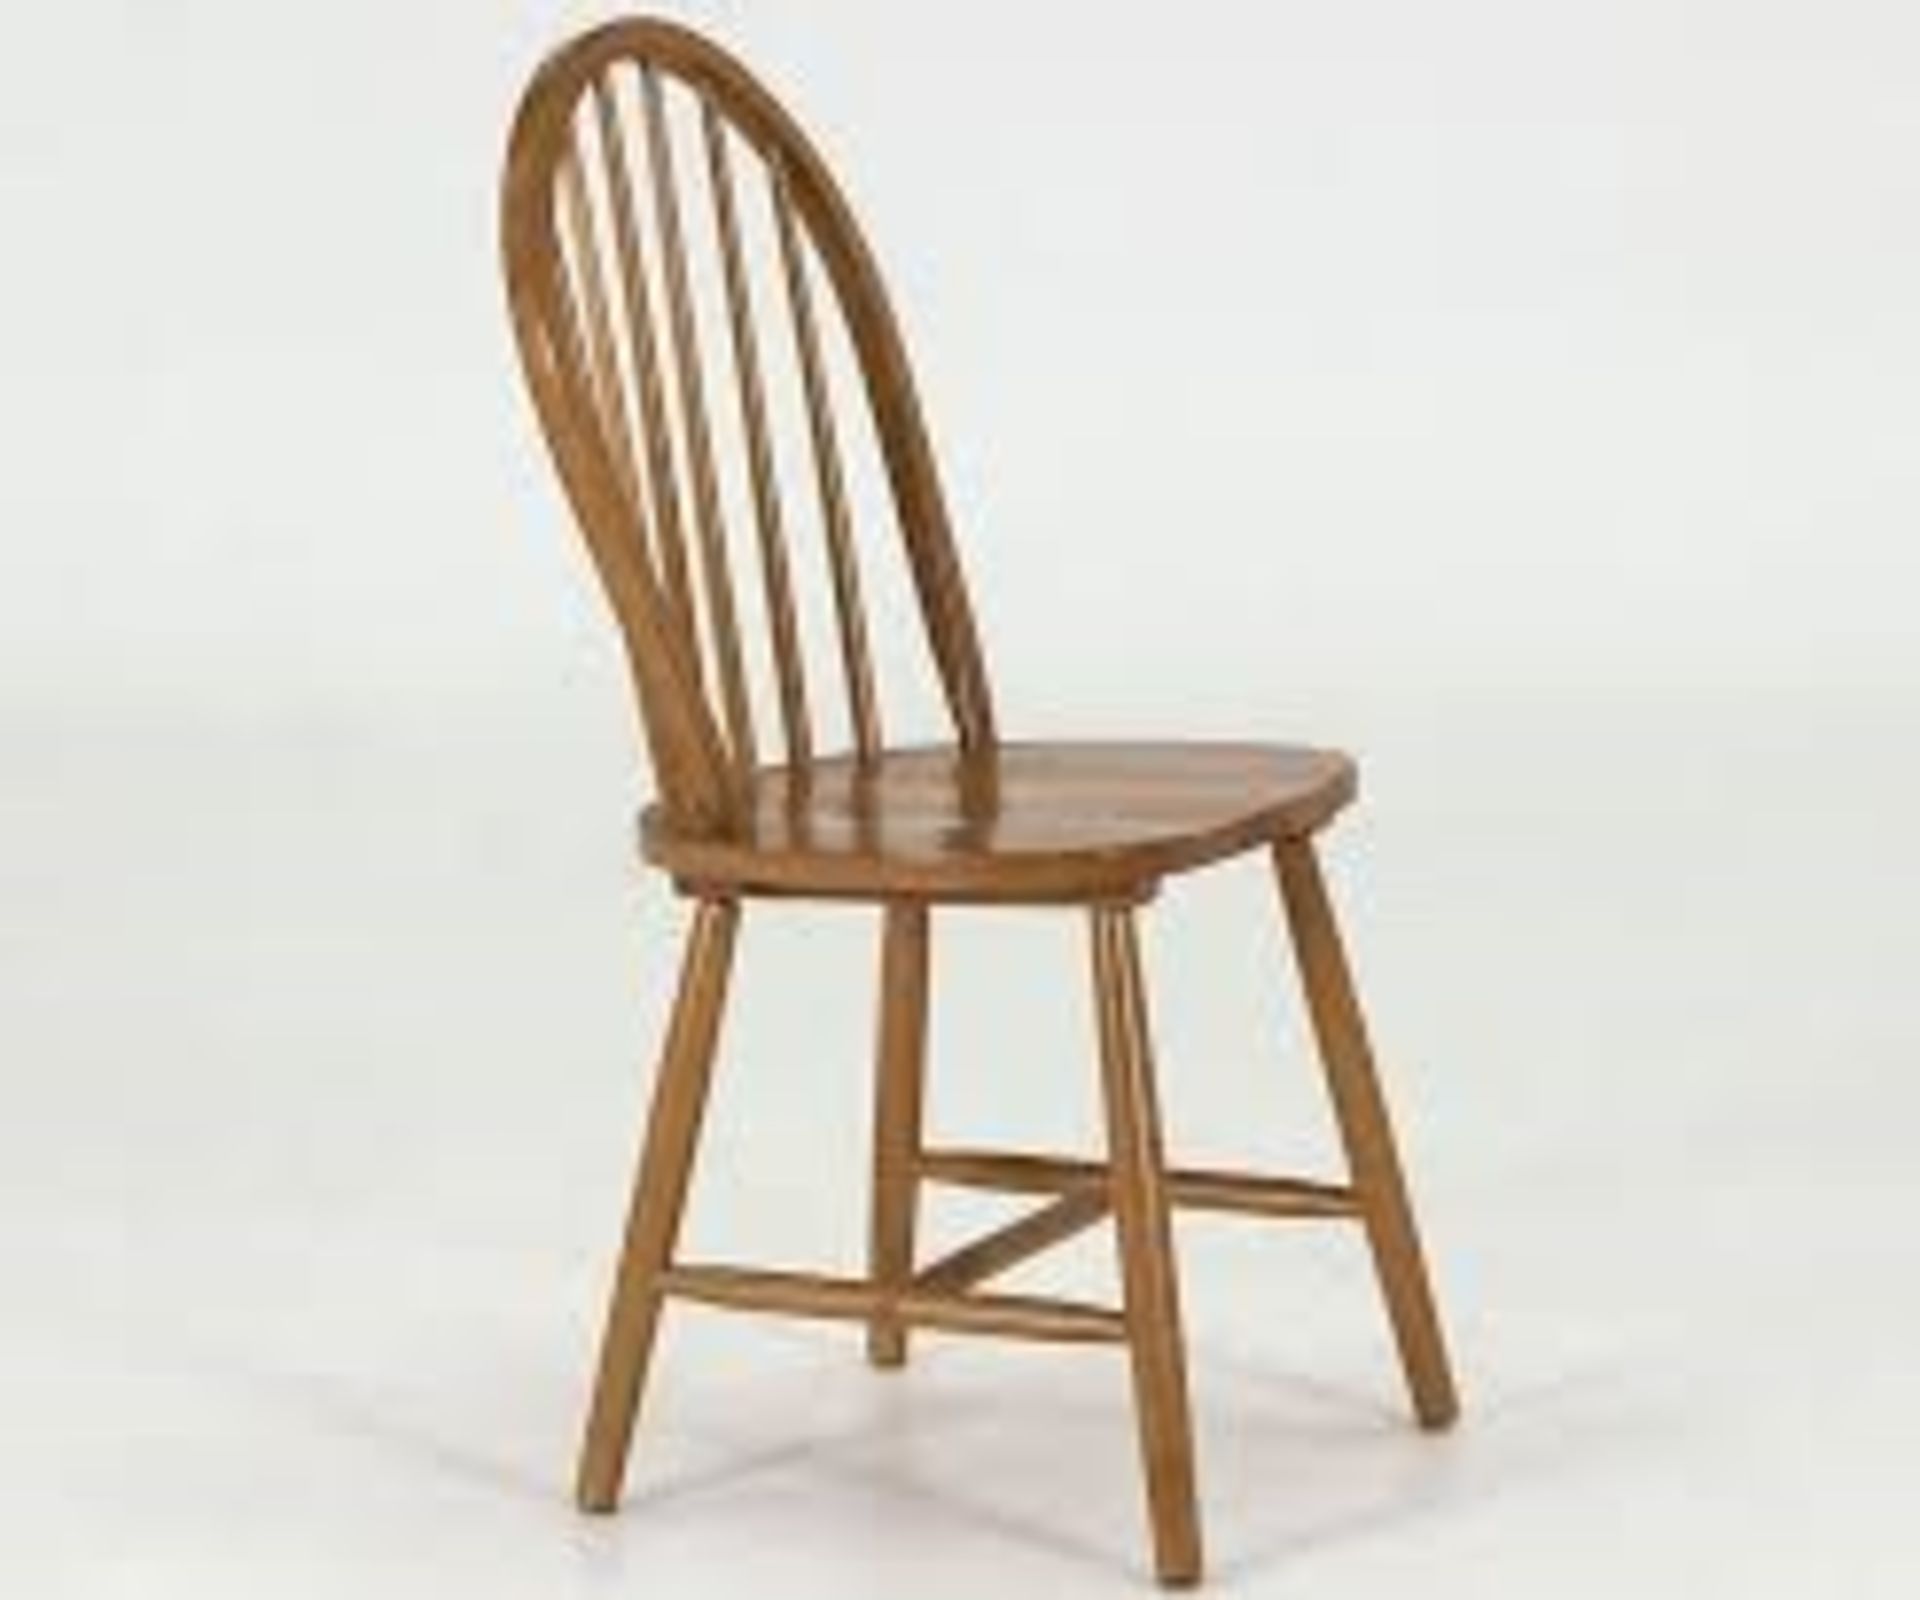 Wynsor 2 Piece Dining Chairs RRP £120 (Viewing or Appraisals Highly Recommended)